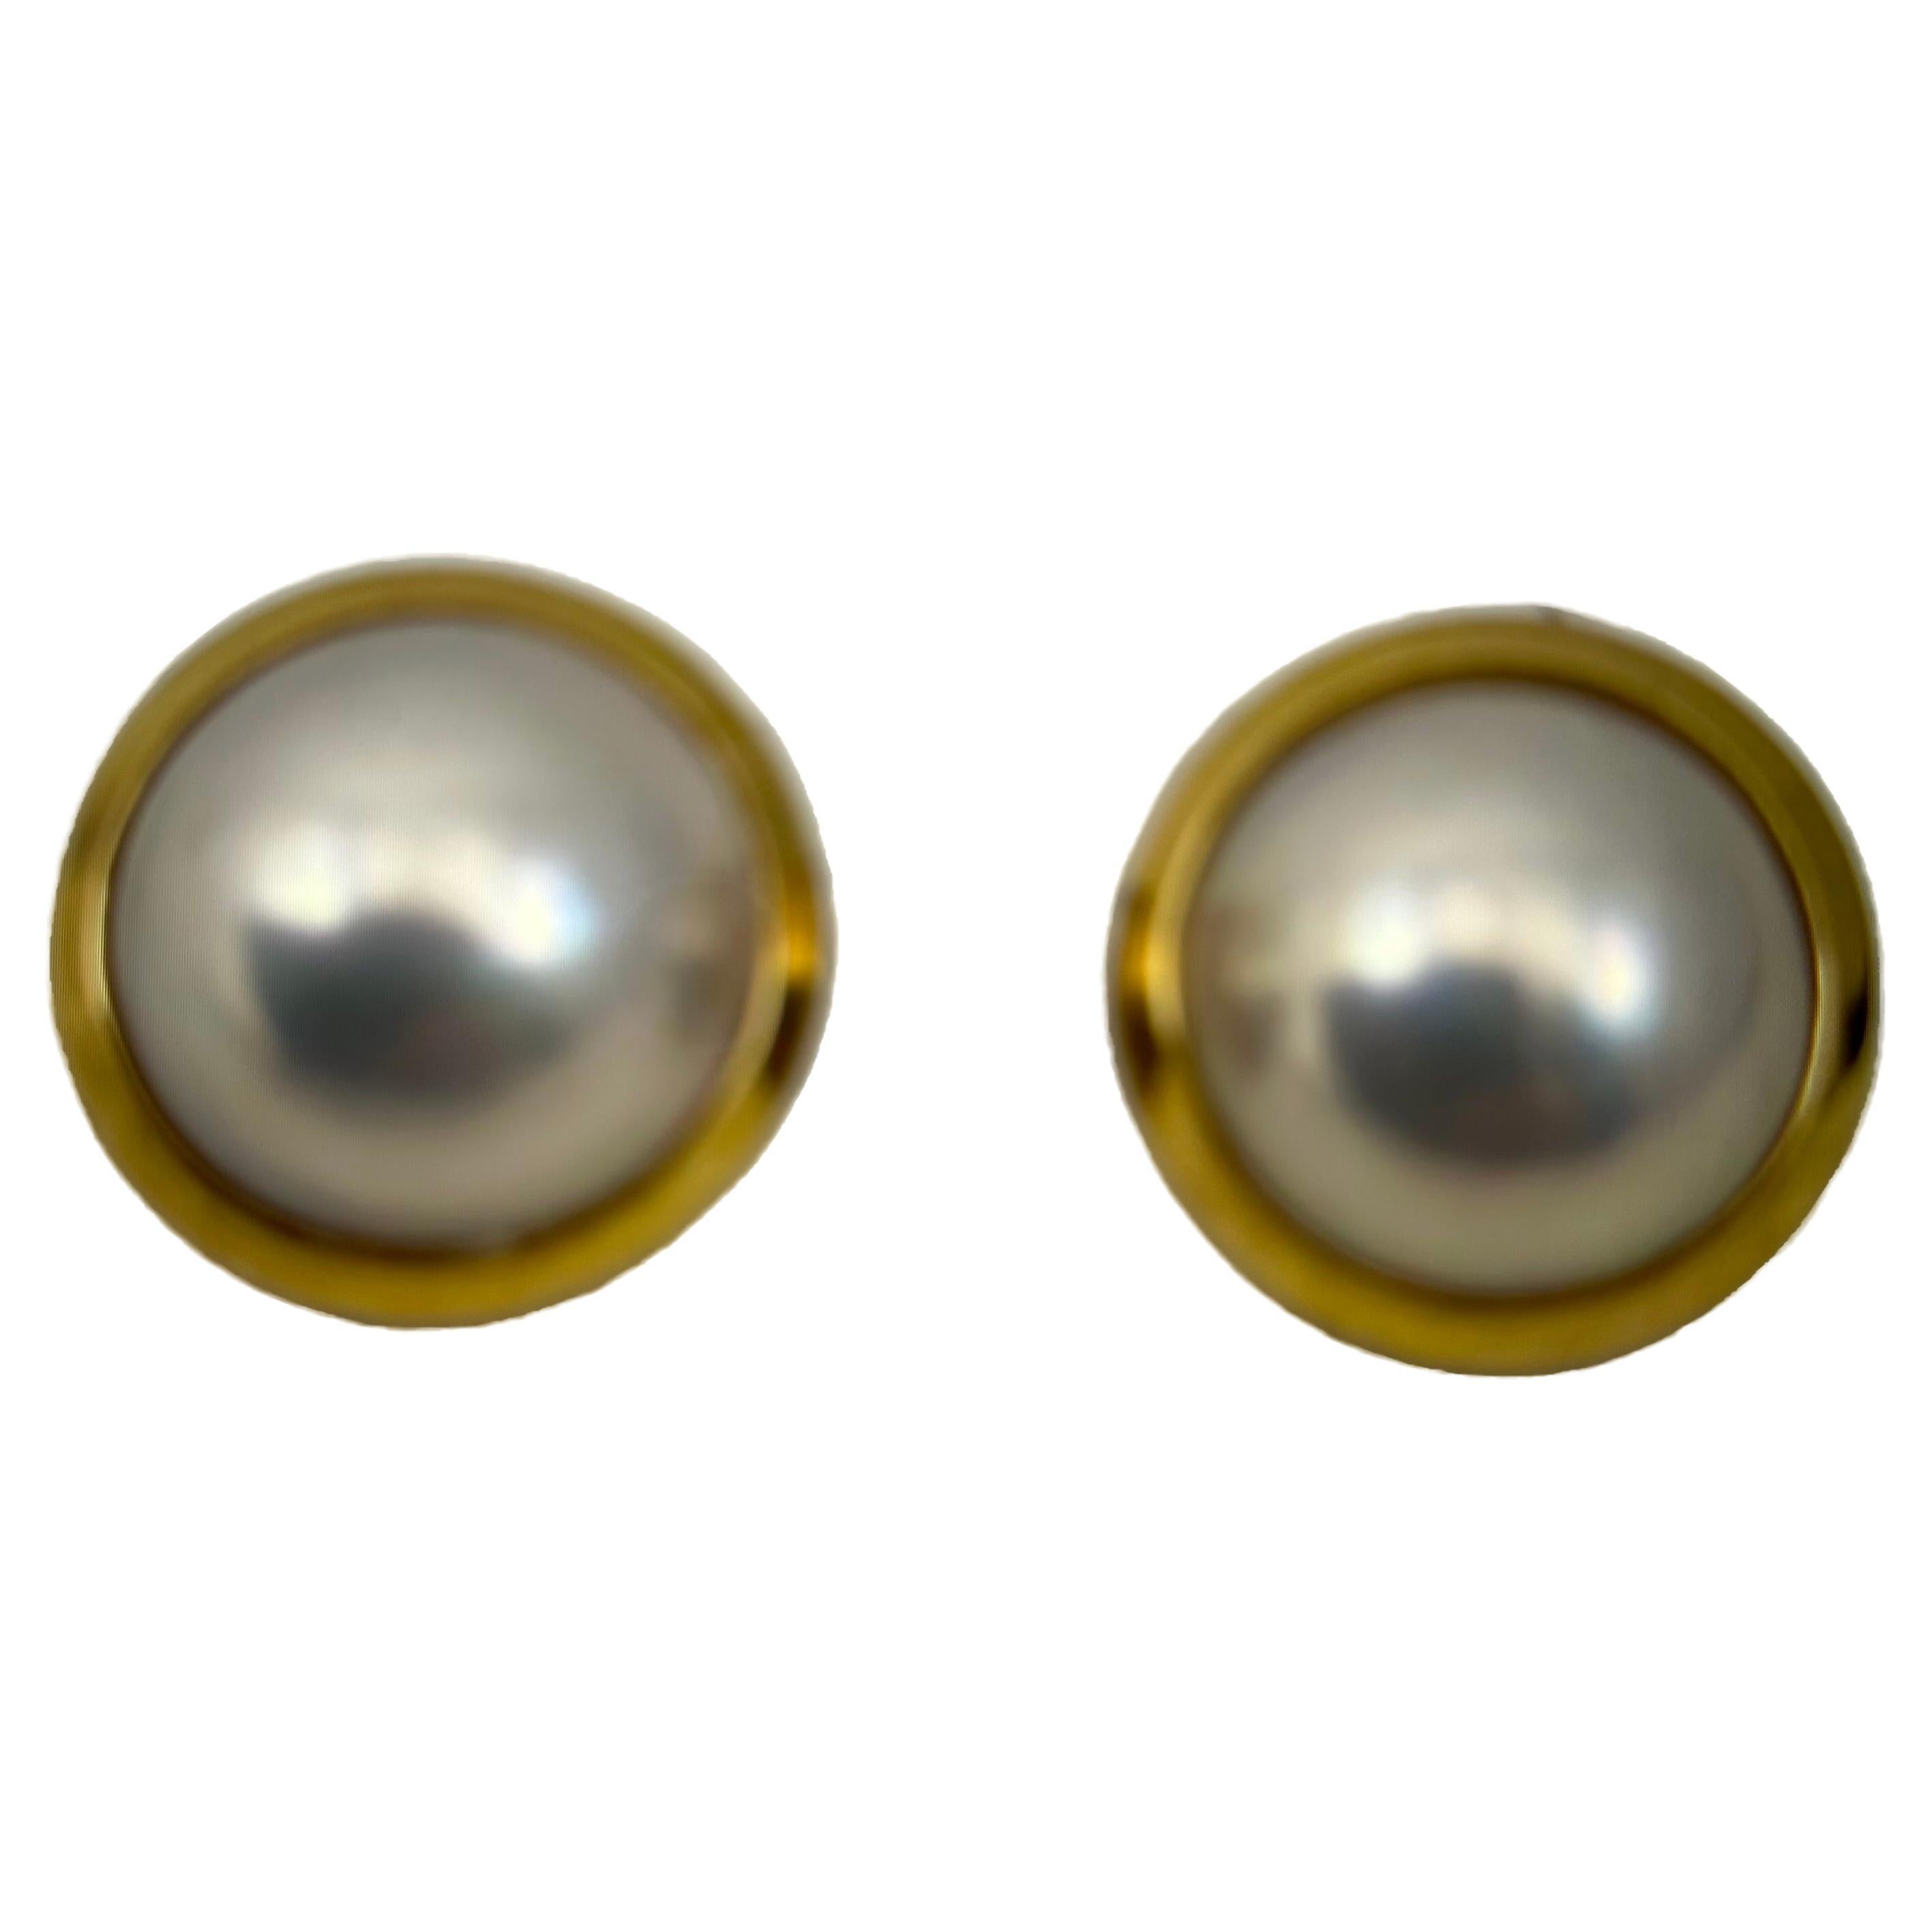 18k Yellow Gold 16mm Round 13.5mm Cultured Mabe Pearl Clip On Earrings